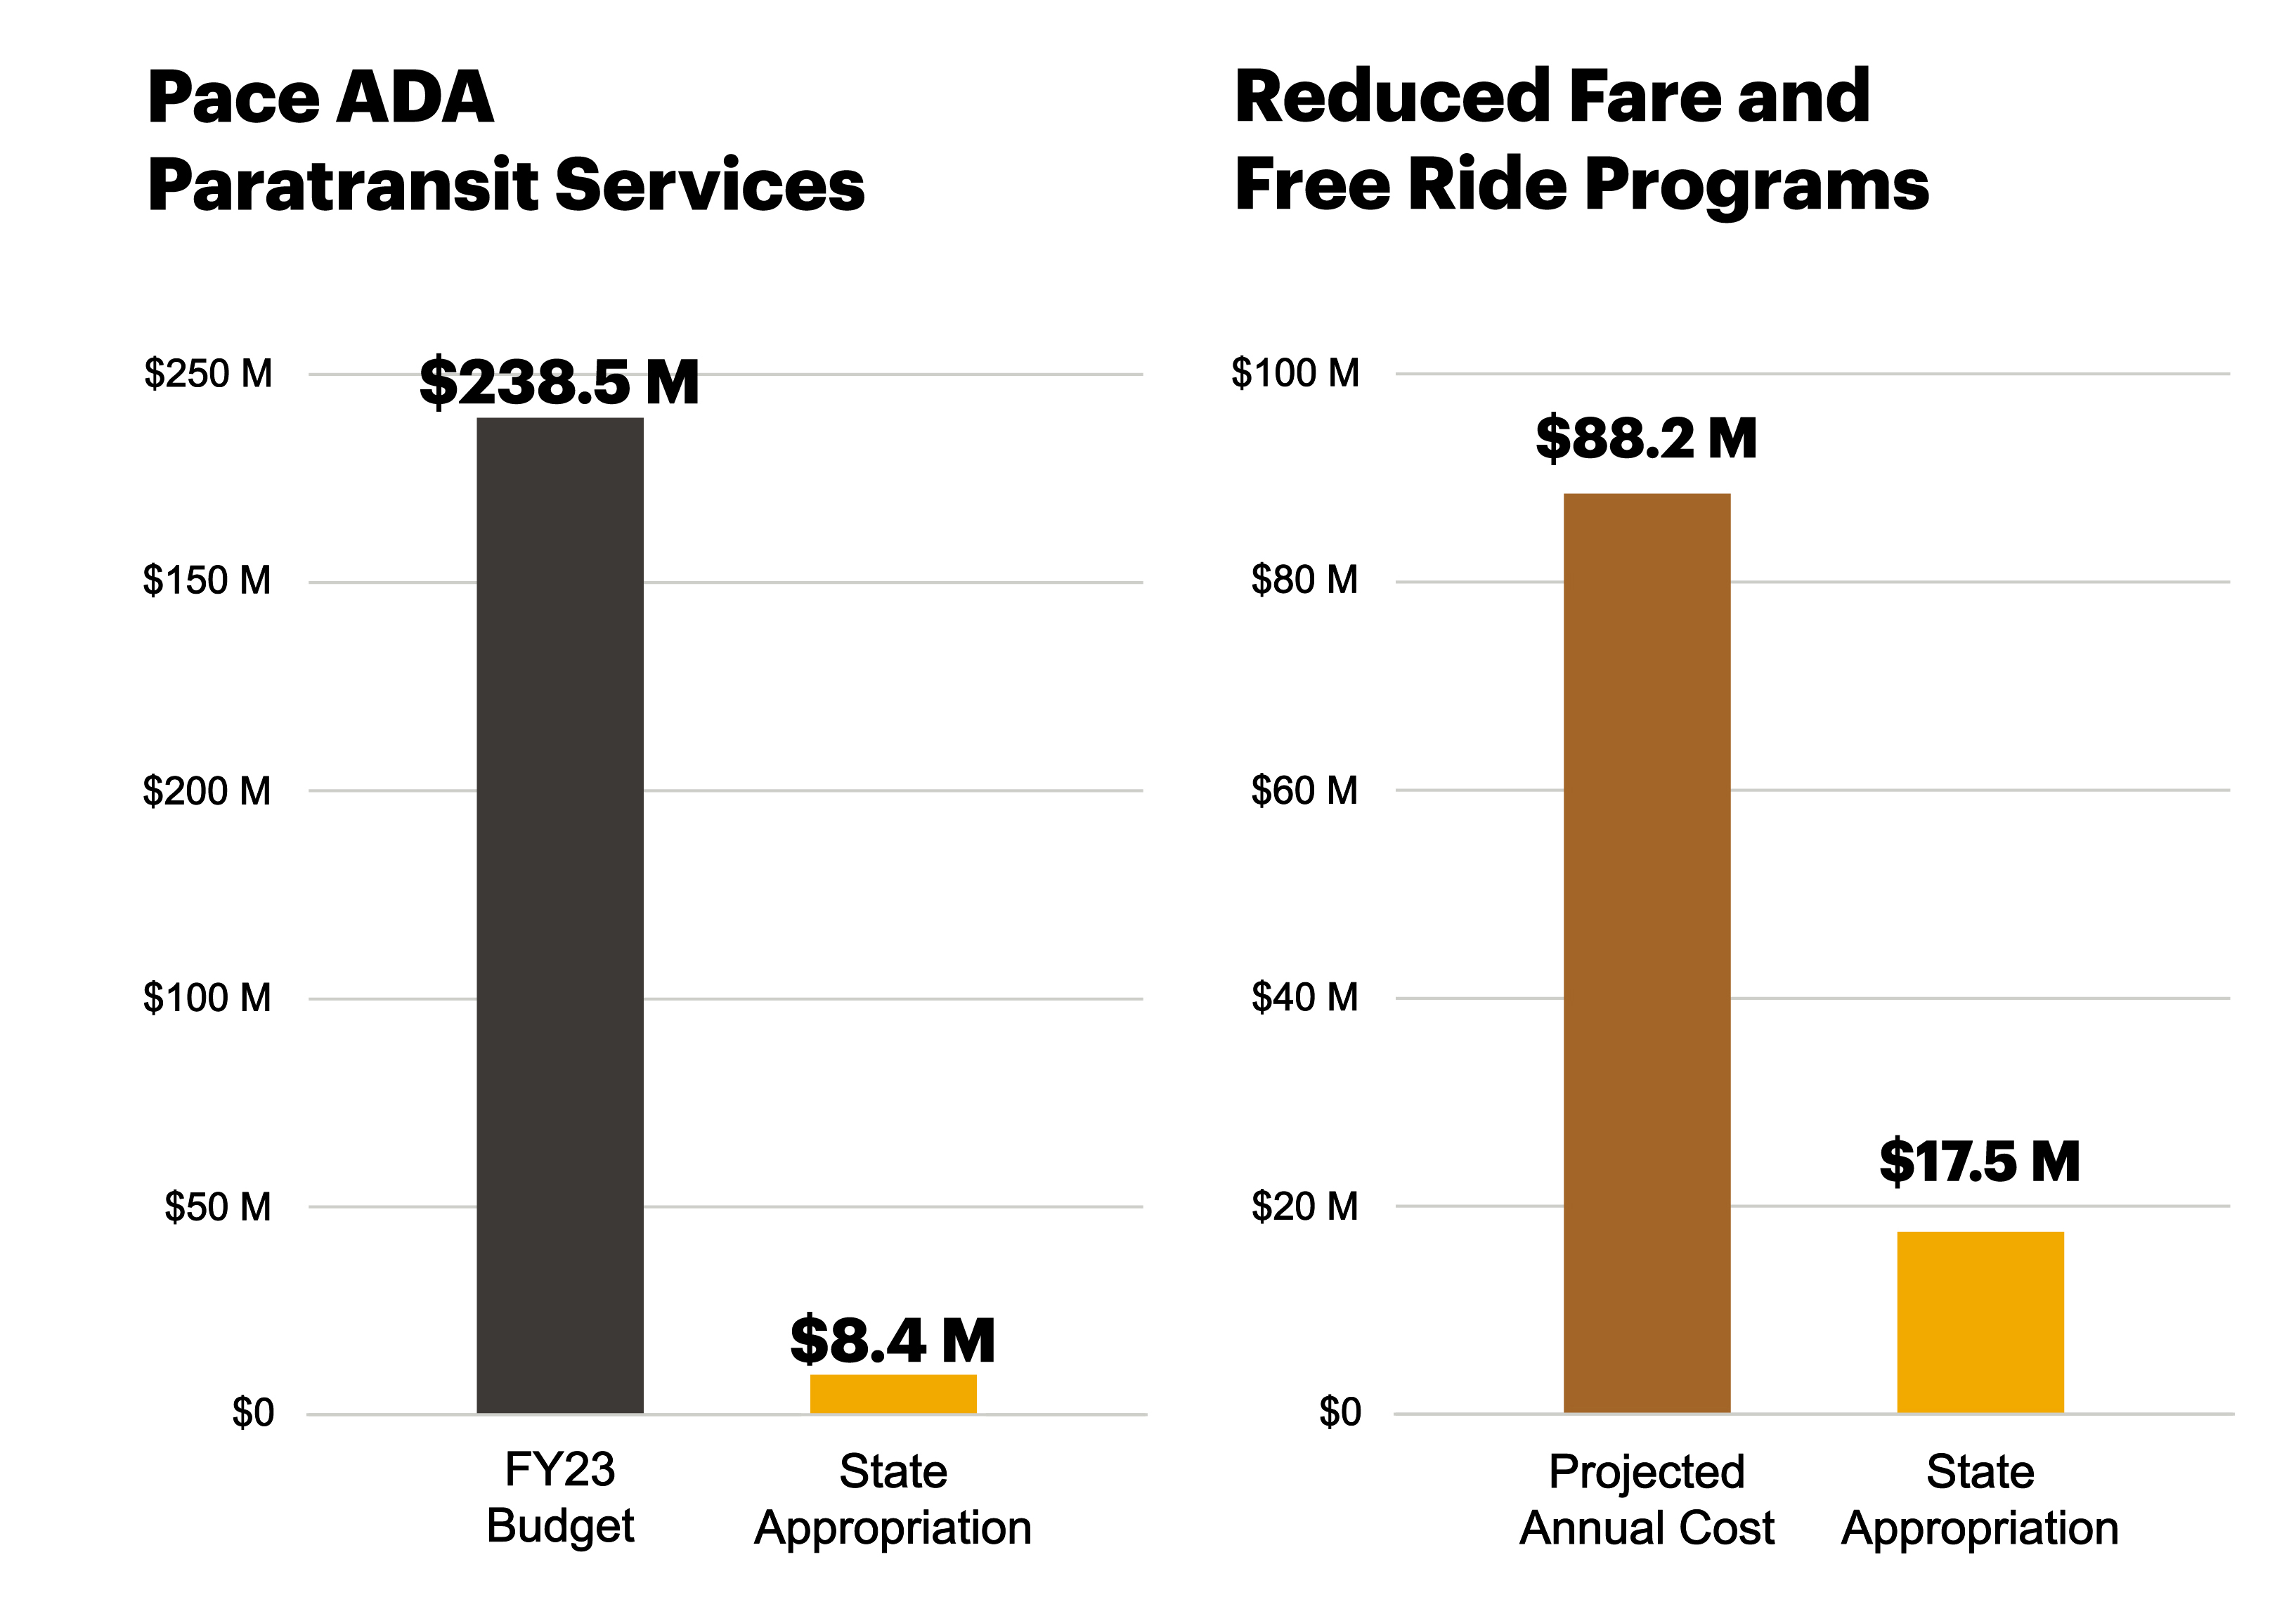 ADA Paratransit and Reduced Fare/Ride Free programs - need vs. state funding